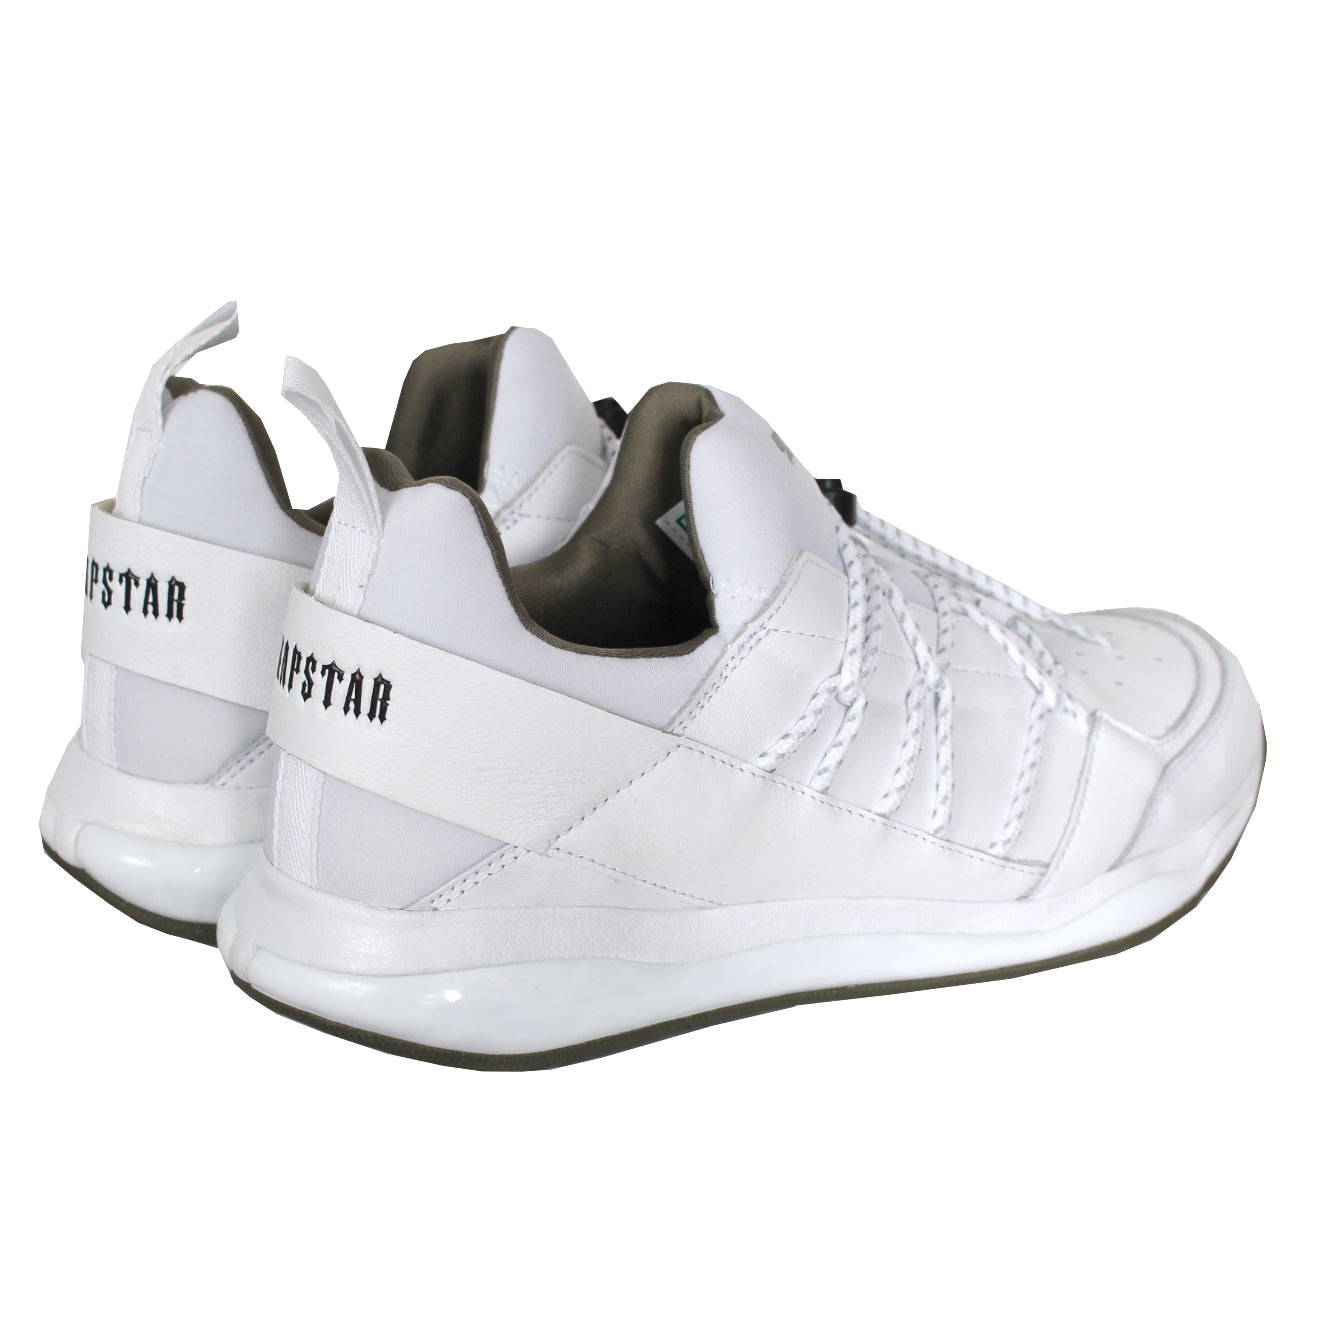 trapstar shoes